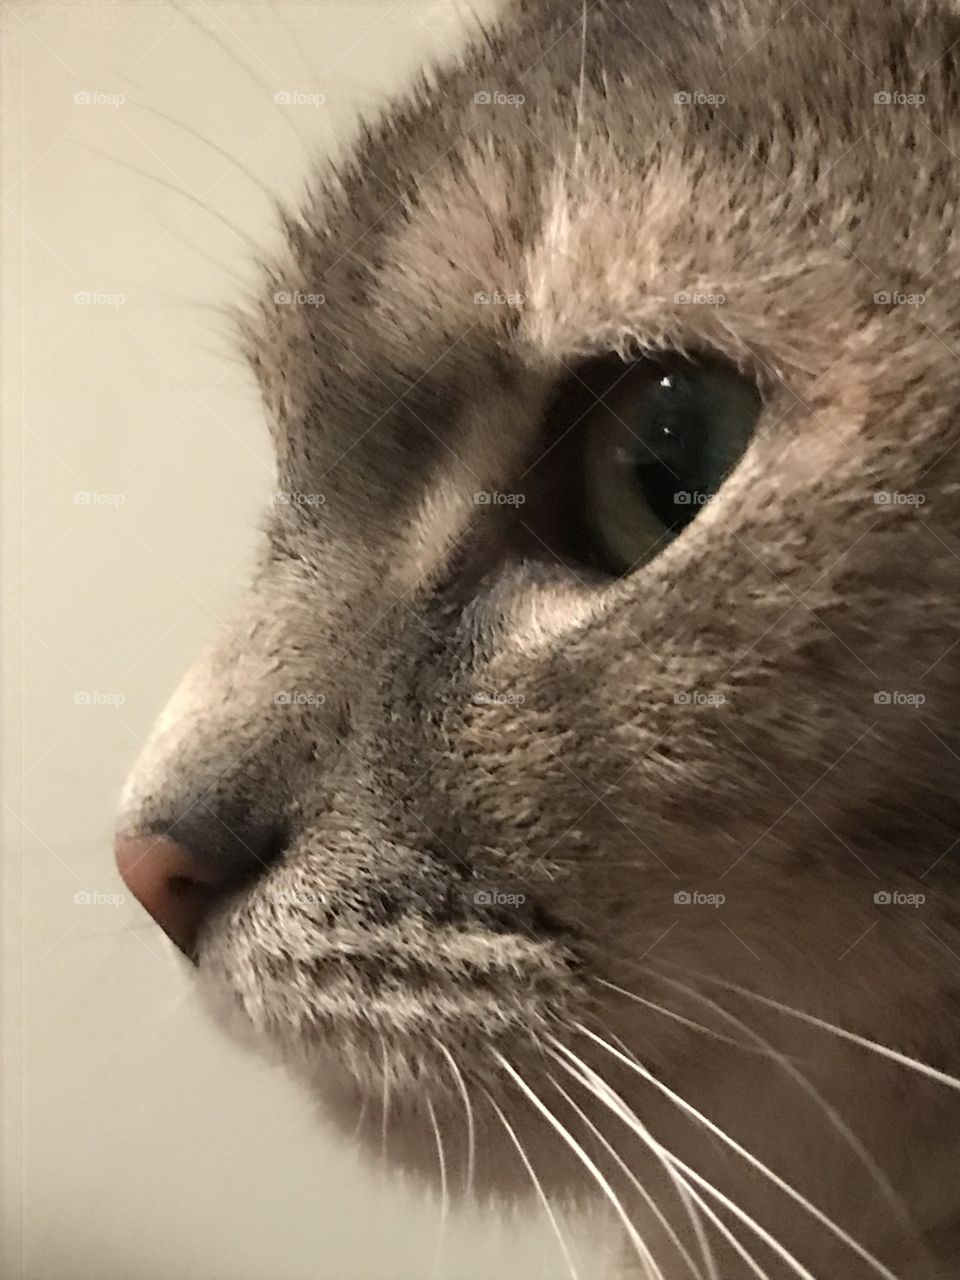 The close up of a cat